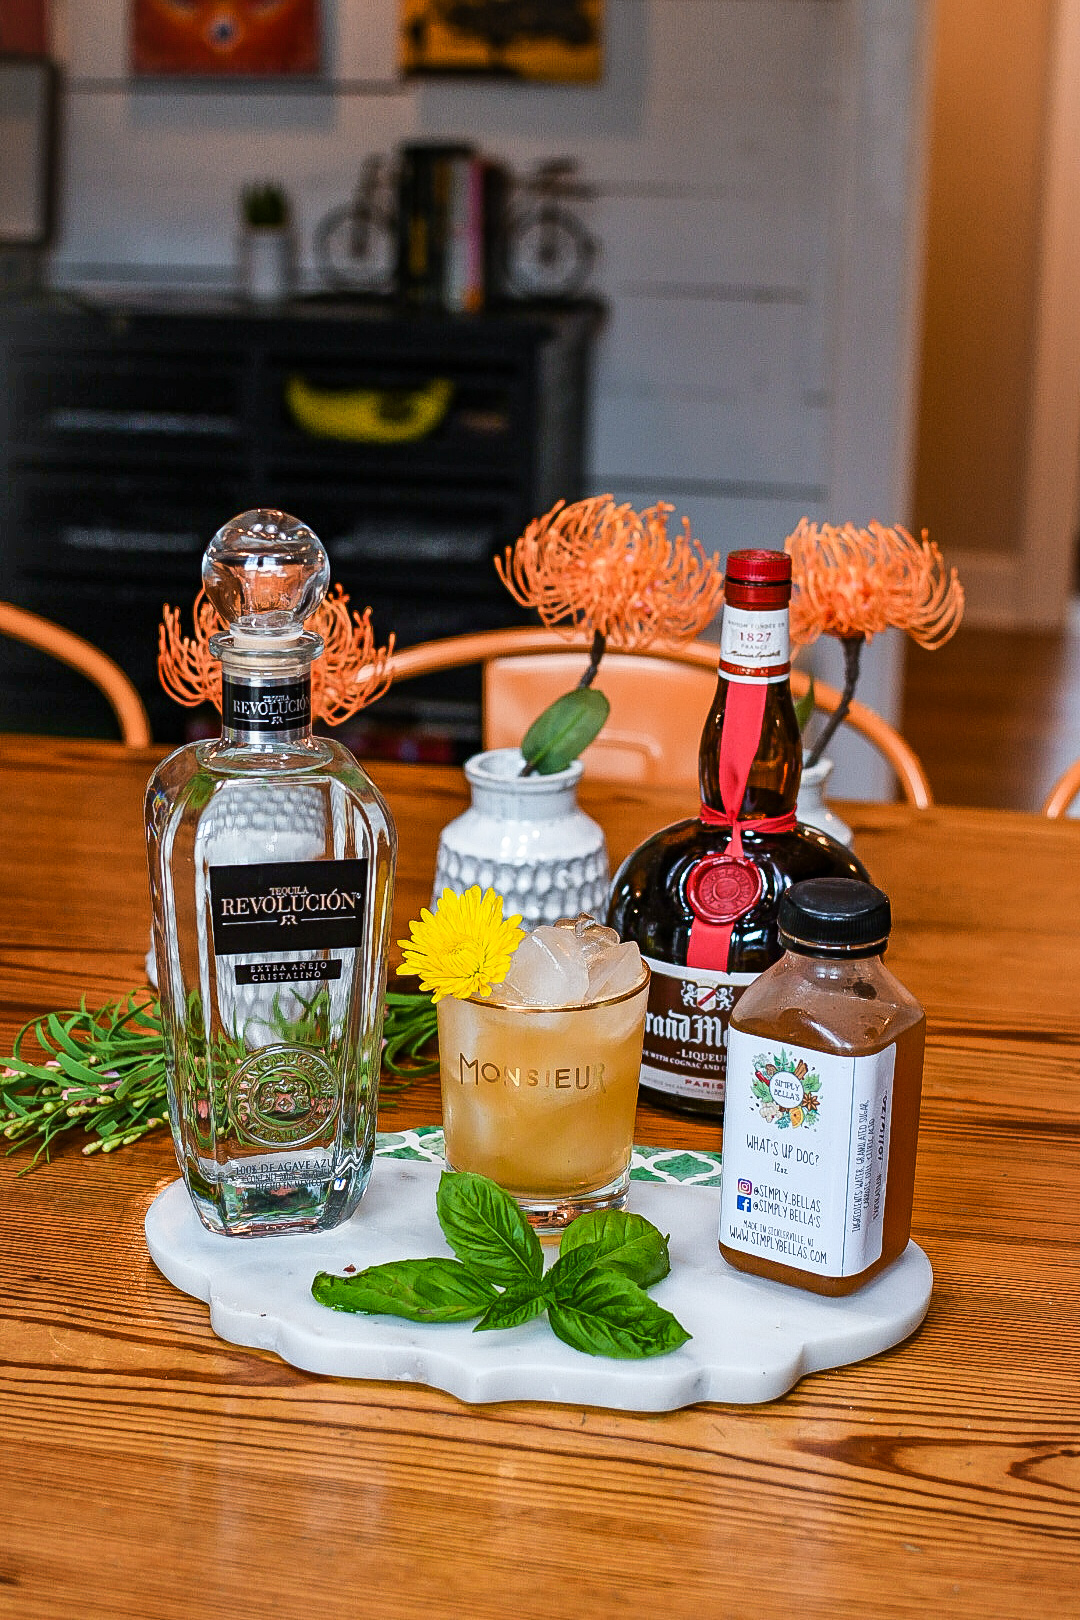 Three travel inspired cocktails from around the world. The Cabo Sunset. Mexican inspired cocktail. Tequila Revolutión Extra Añejo Cristalino. Tequila Sunrise. Tequila cocktail recipes